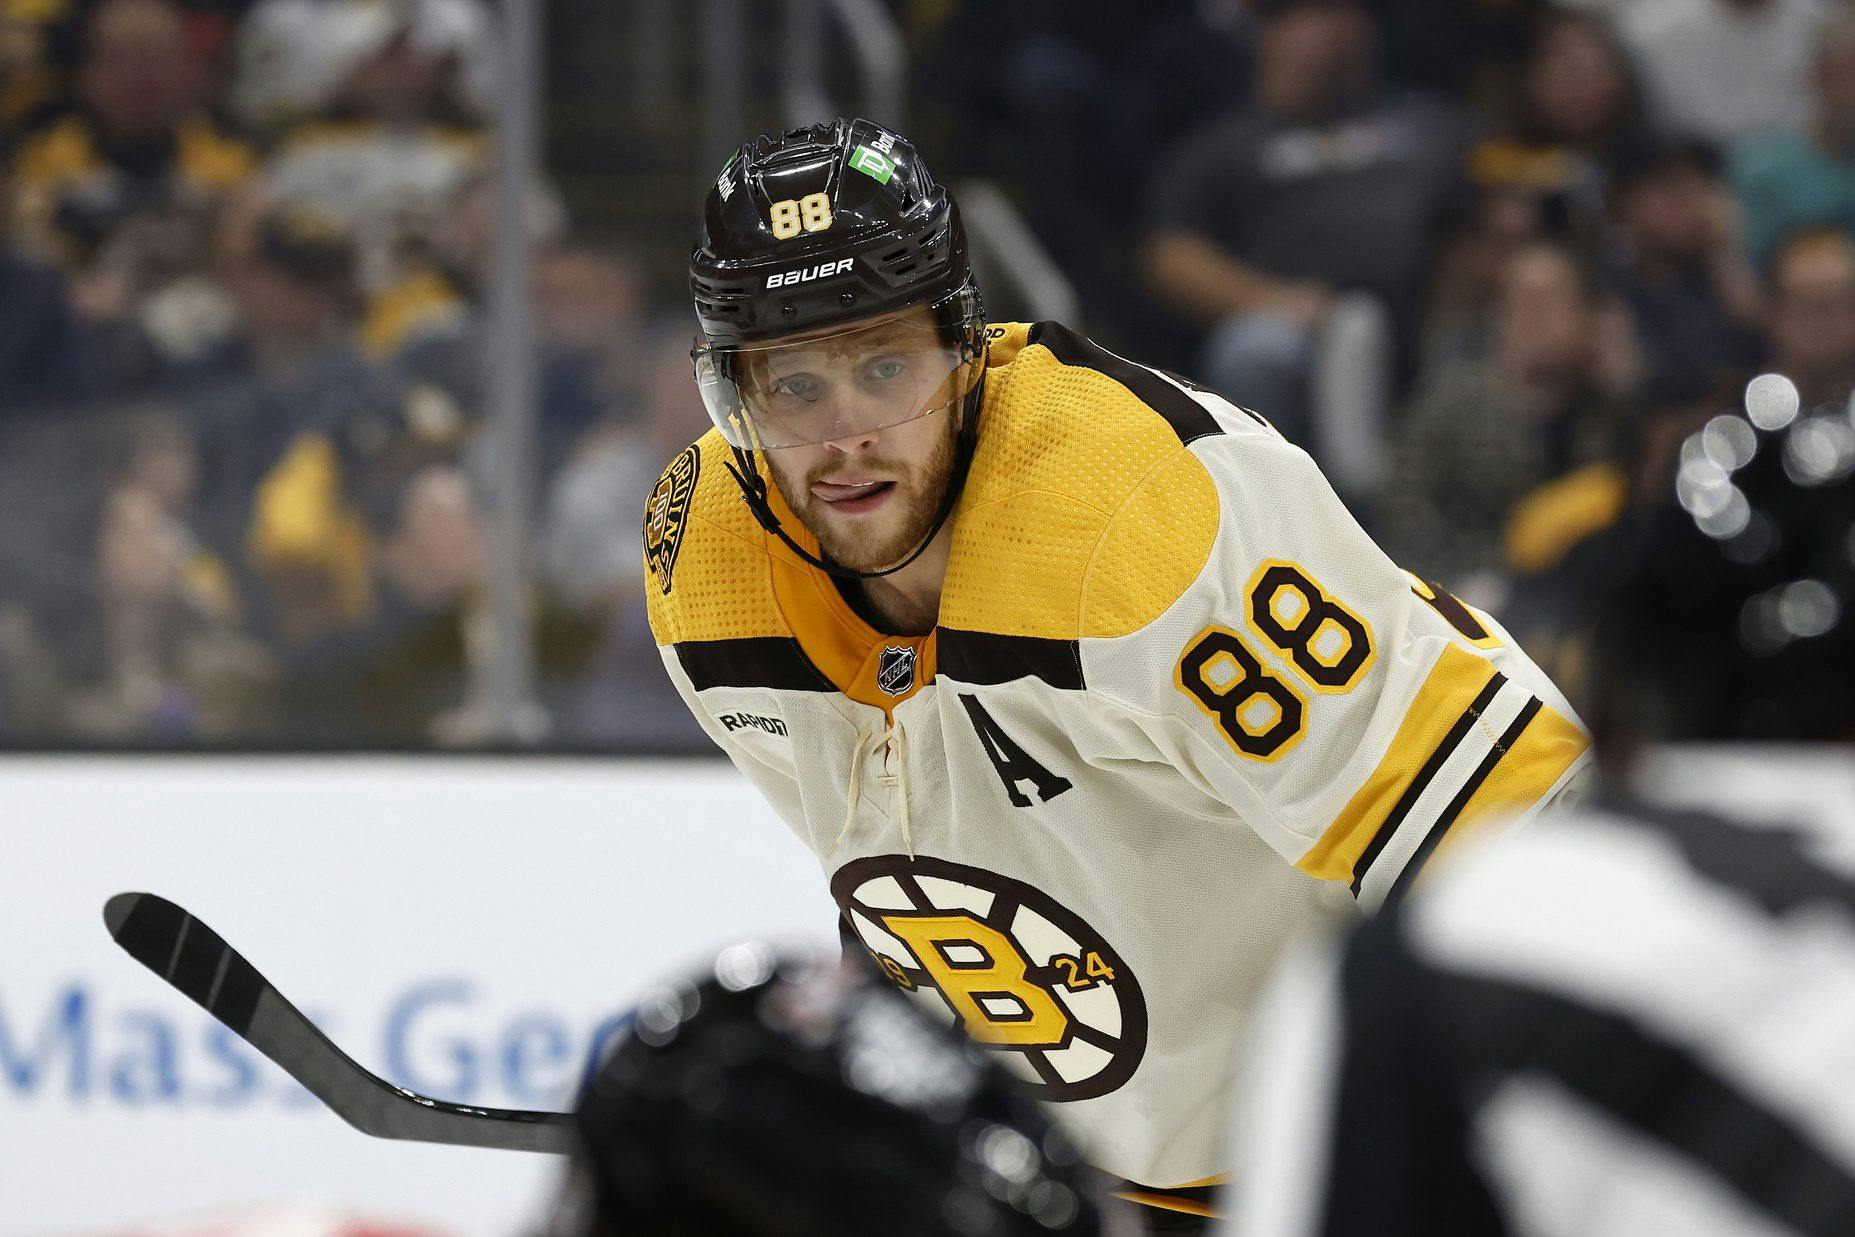 Is David Pastrnak the favourite for the NHL’s Hart Trophy?